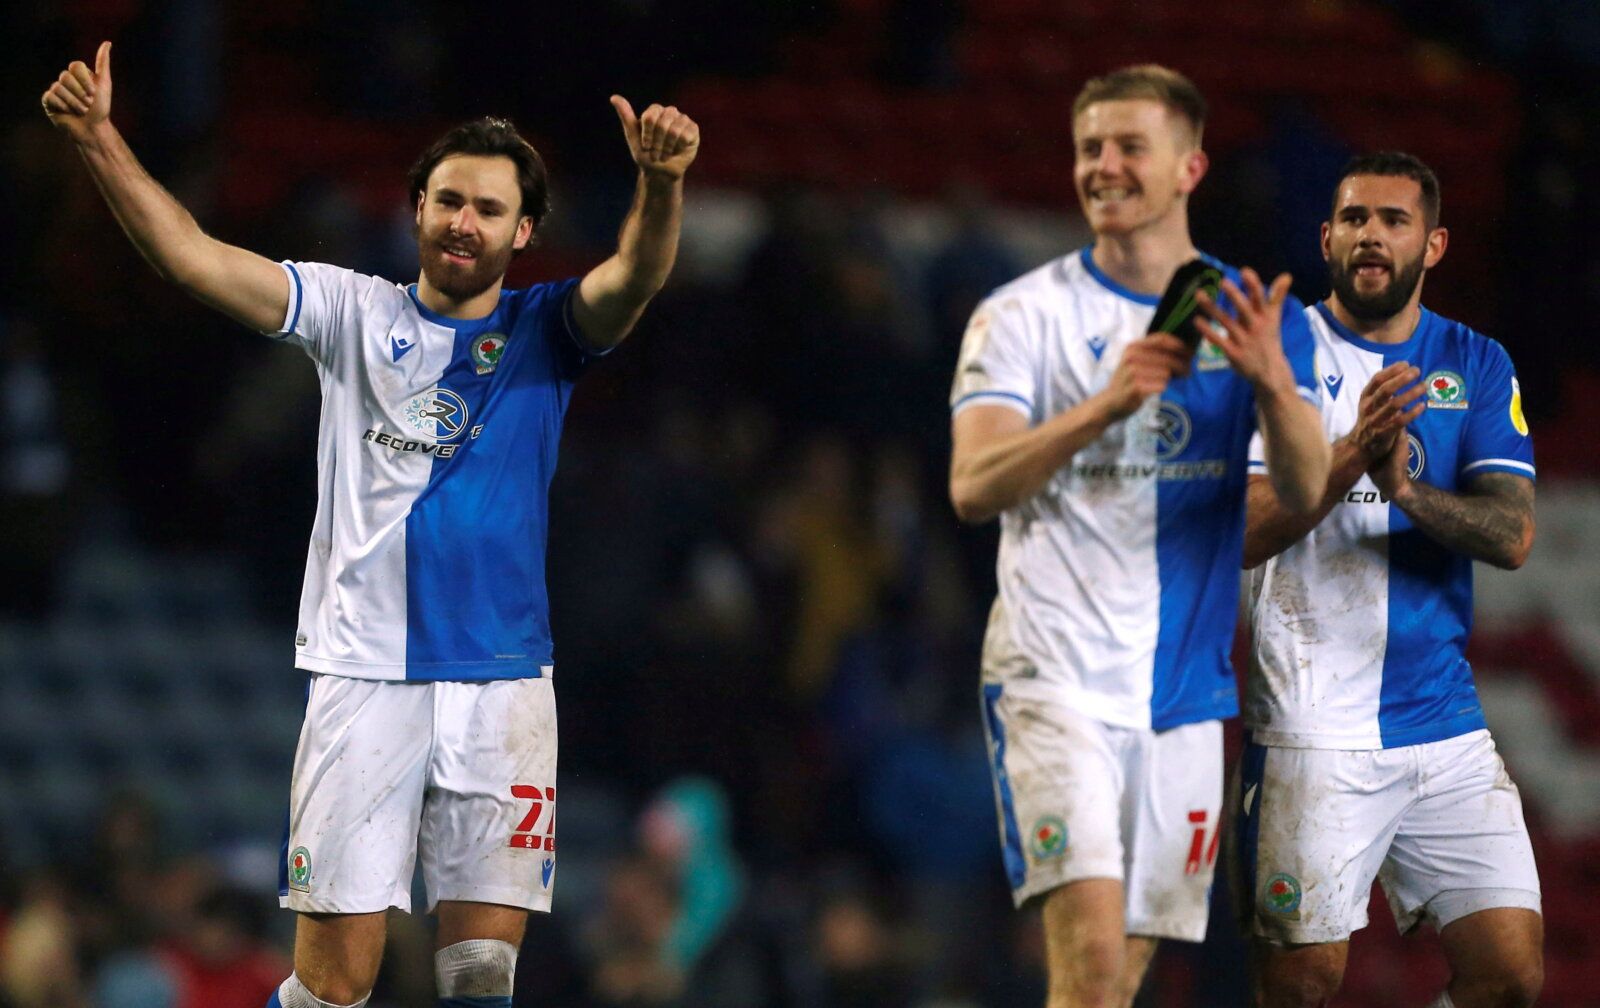 Soccer Football - Blackburn Rovers v Preston North End - Ewood Park, Blackburn, Britain - December 4, 2021  Blackburn Rovers' Ben Brereton celebrates with teammates after the match   Action Images/Craig Brough  EDITORIAL USE ONLY. No use with unauthorized audio, video, data, fixture lists, club/league logos or 